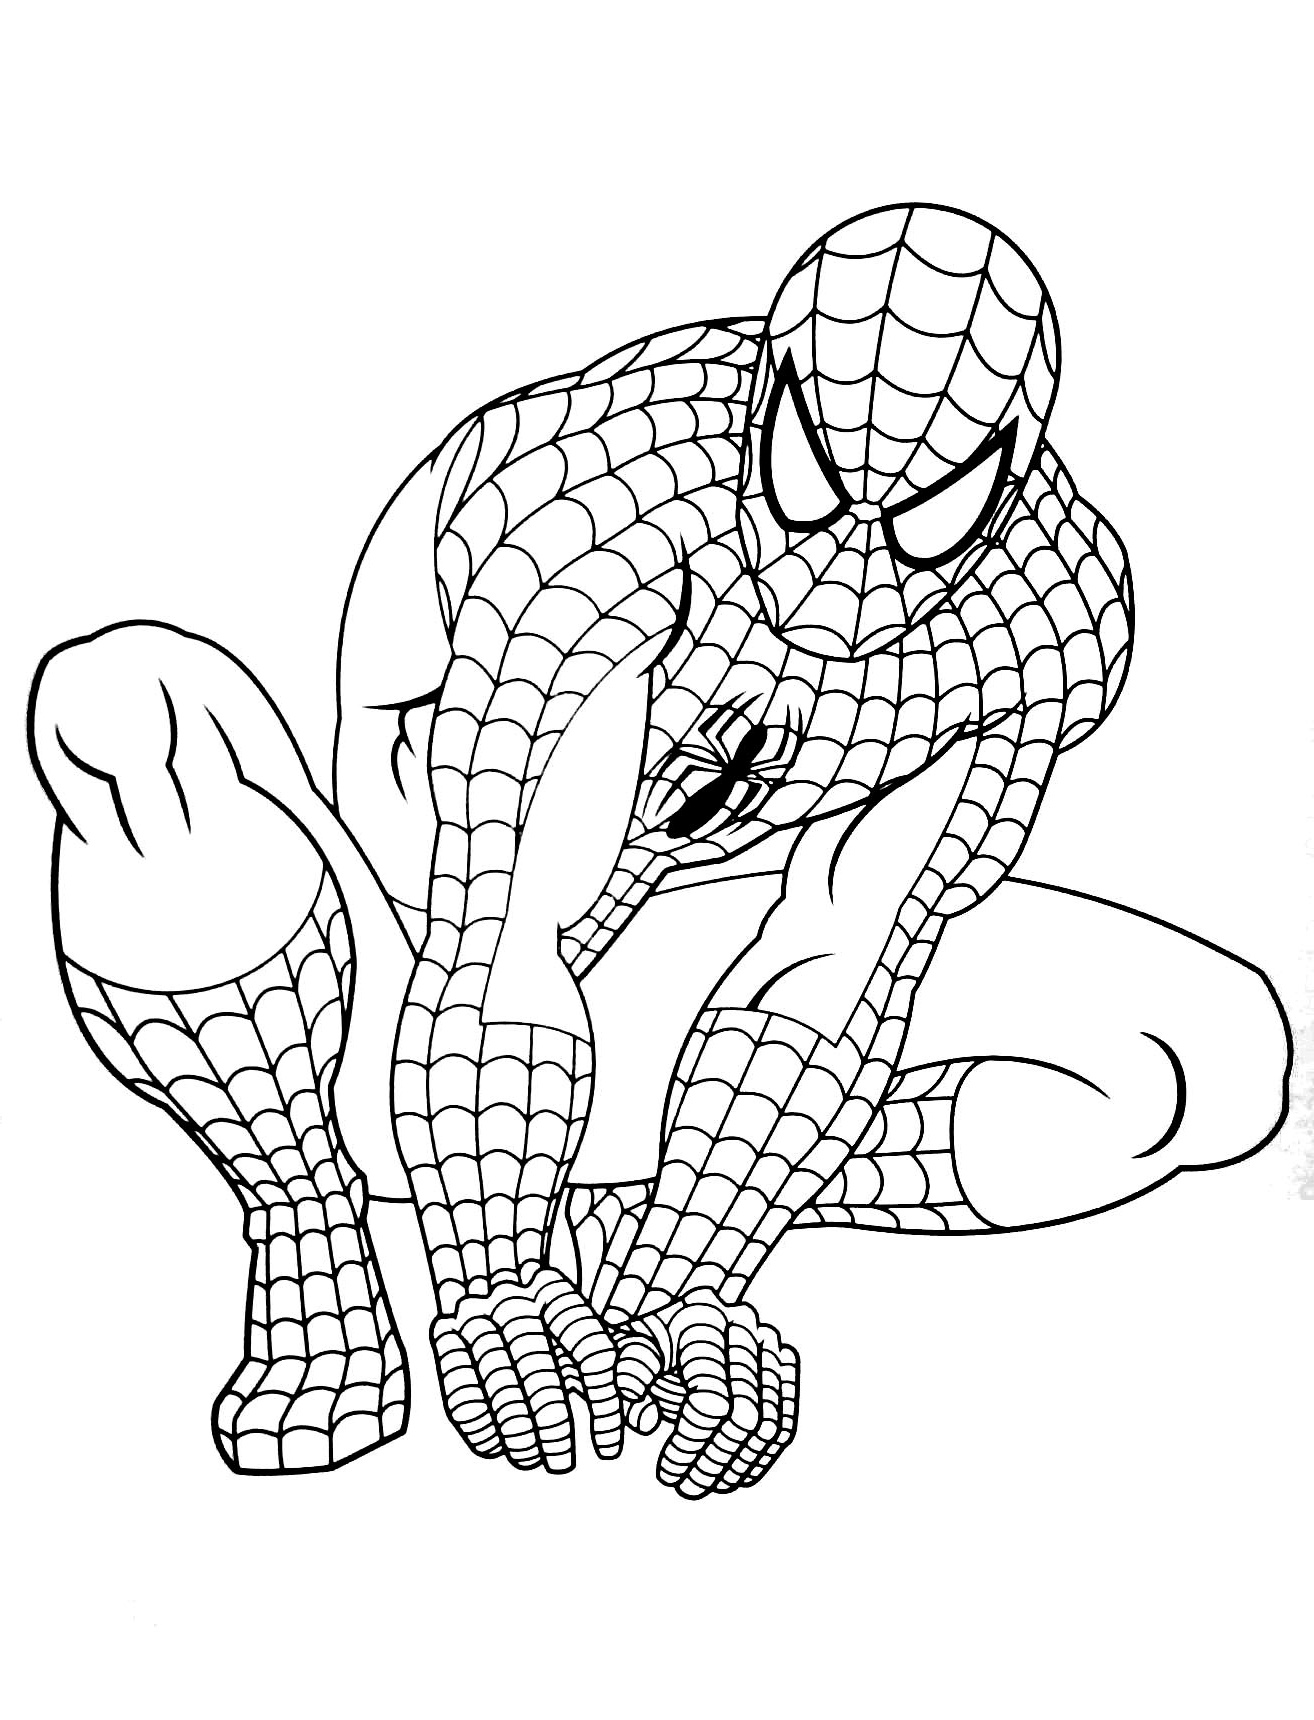 Spiderman A Imprimer Beau Image Spiderman to Print for Free Spiderman Kids Coloring Pages